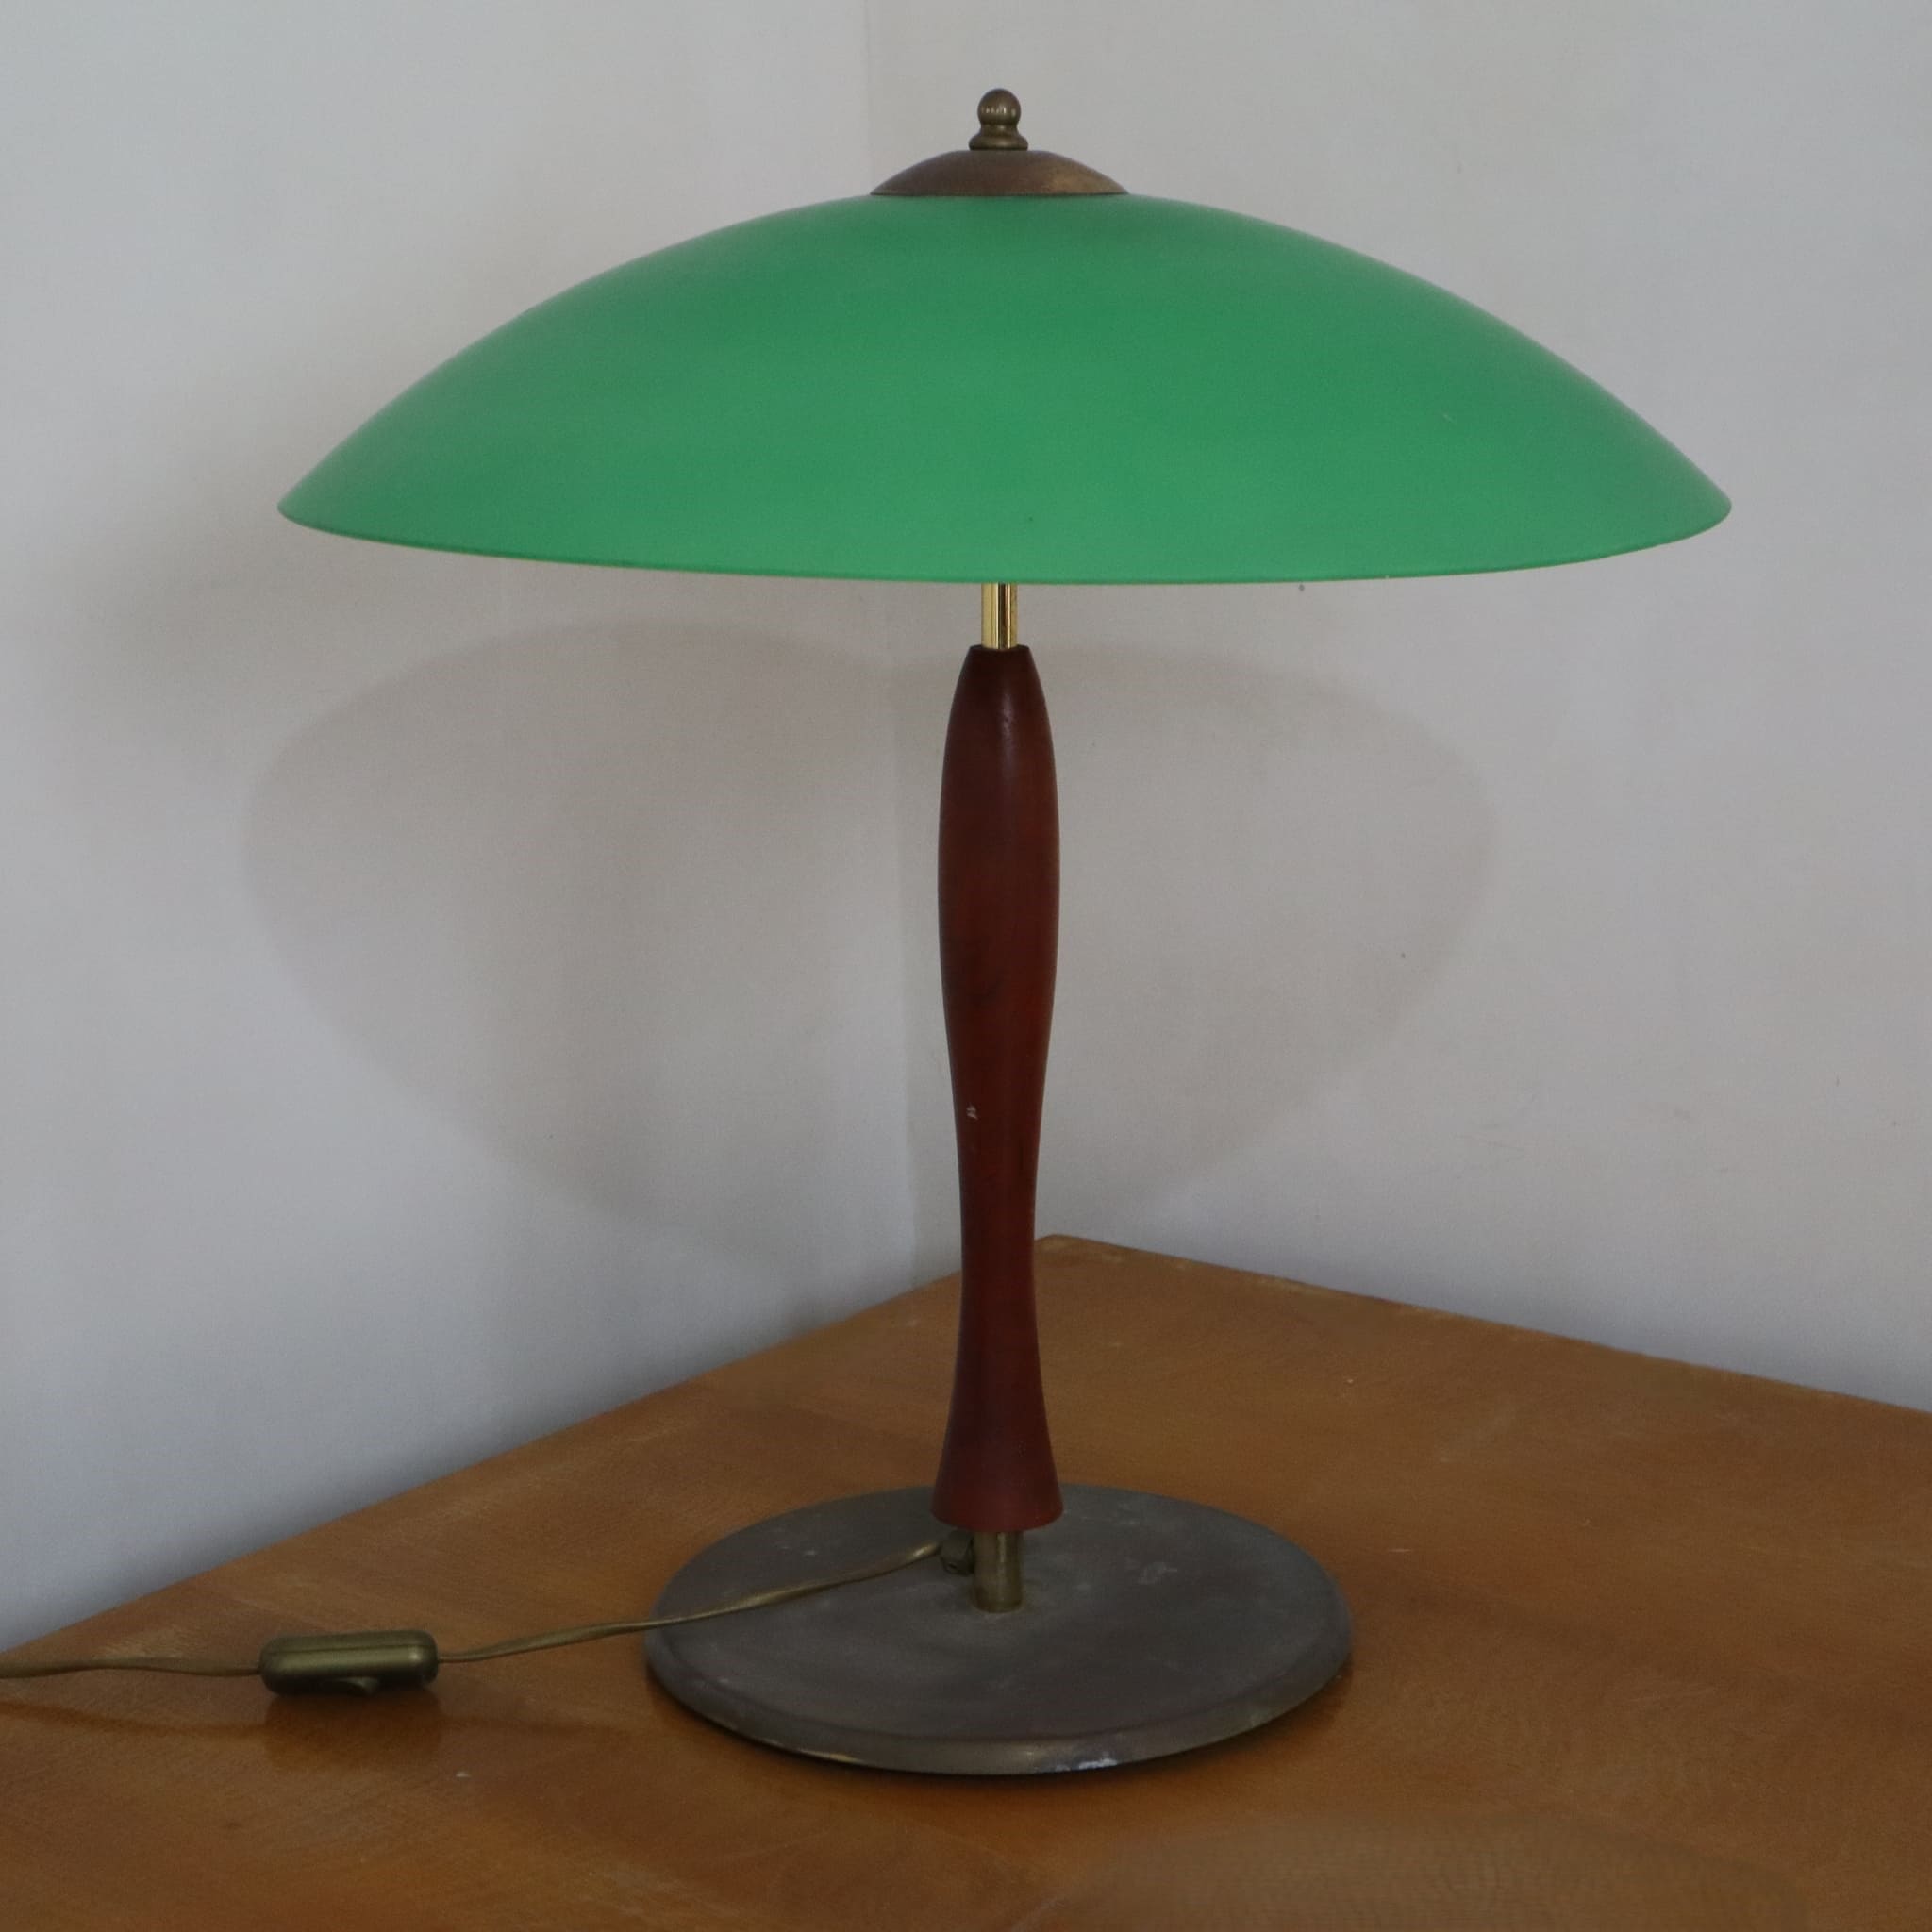 visionidepoca-modern-art-lighting-brass-and-cherry-wood-lamp-early-2000s-natural-light